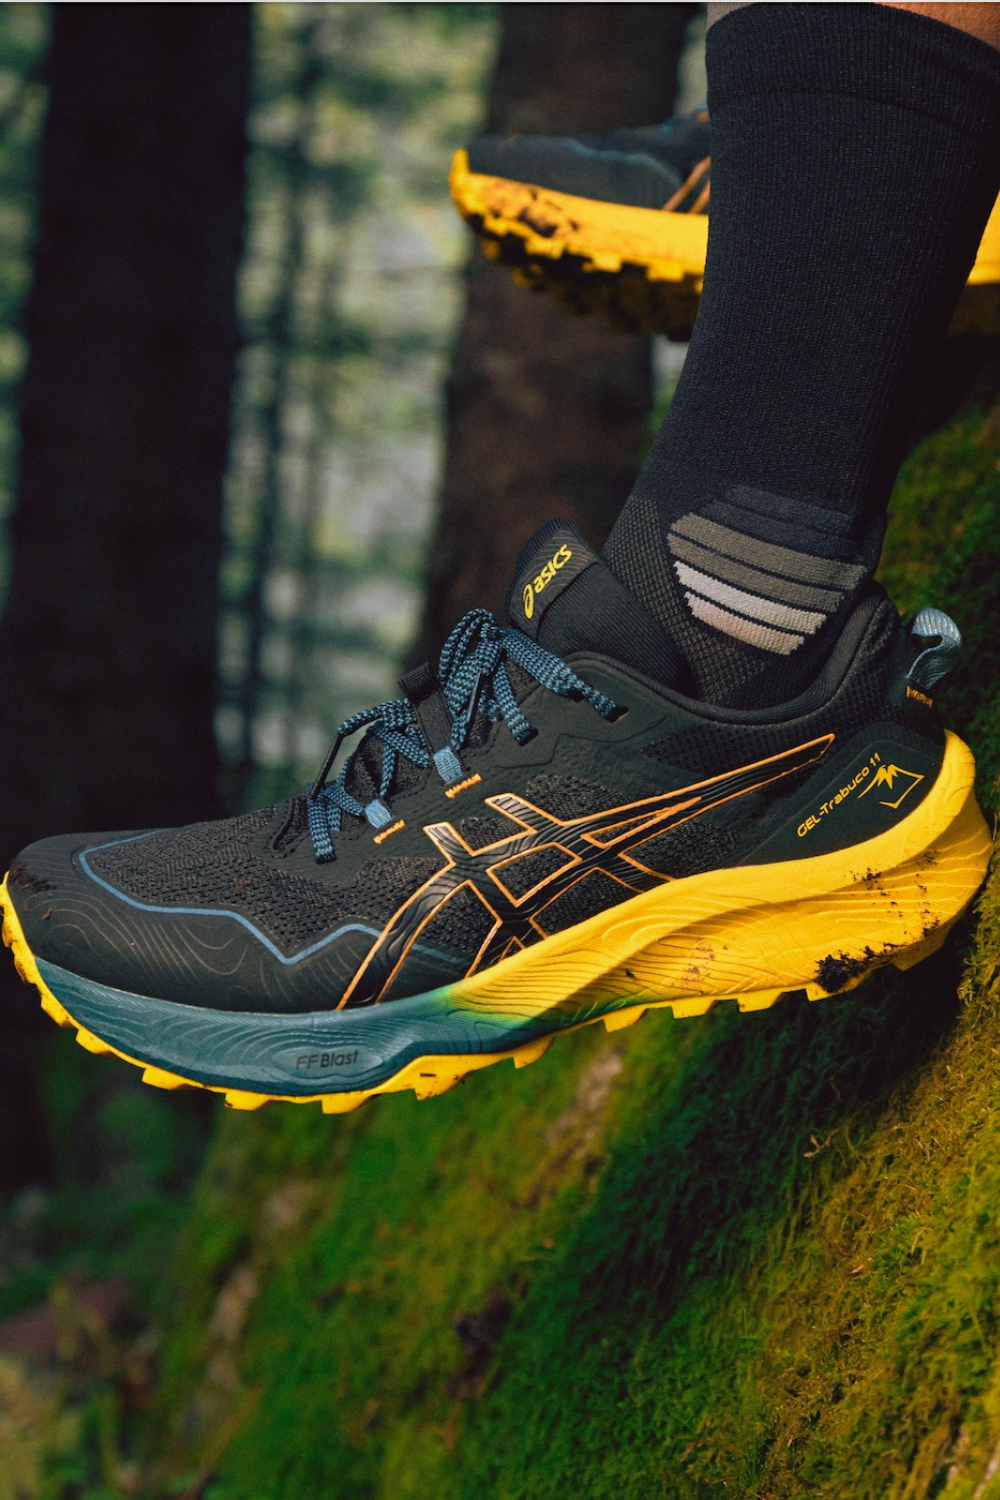 How to Style Trail Shoes: Best 13 Sporty & Functional Outfit Ideas for Women